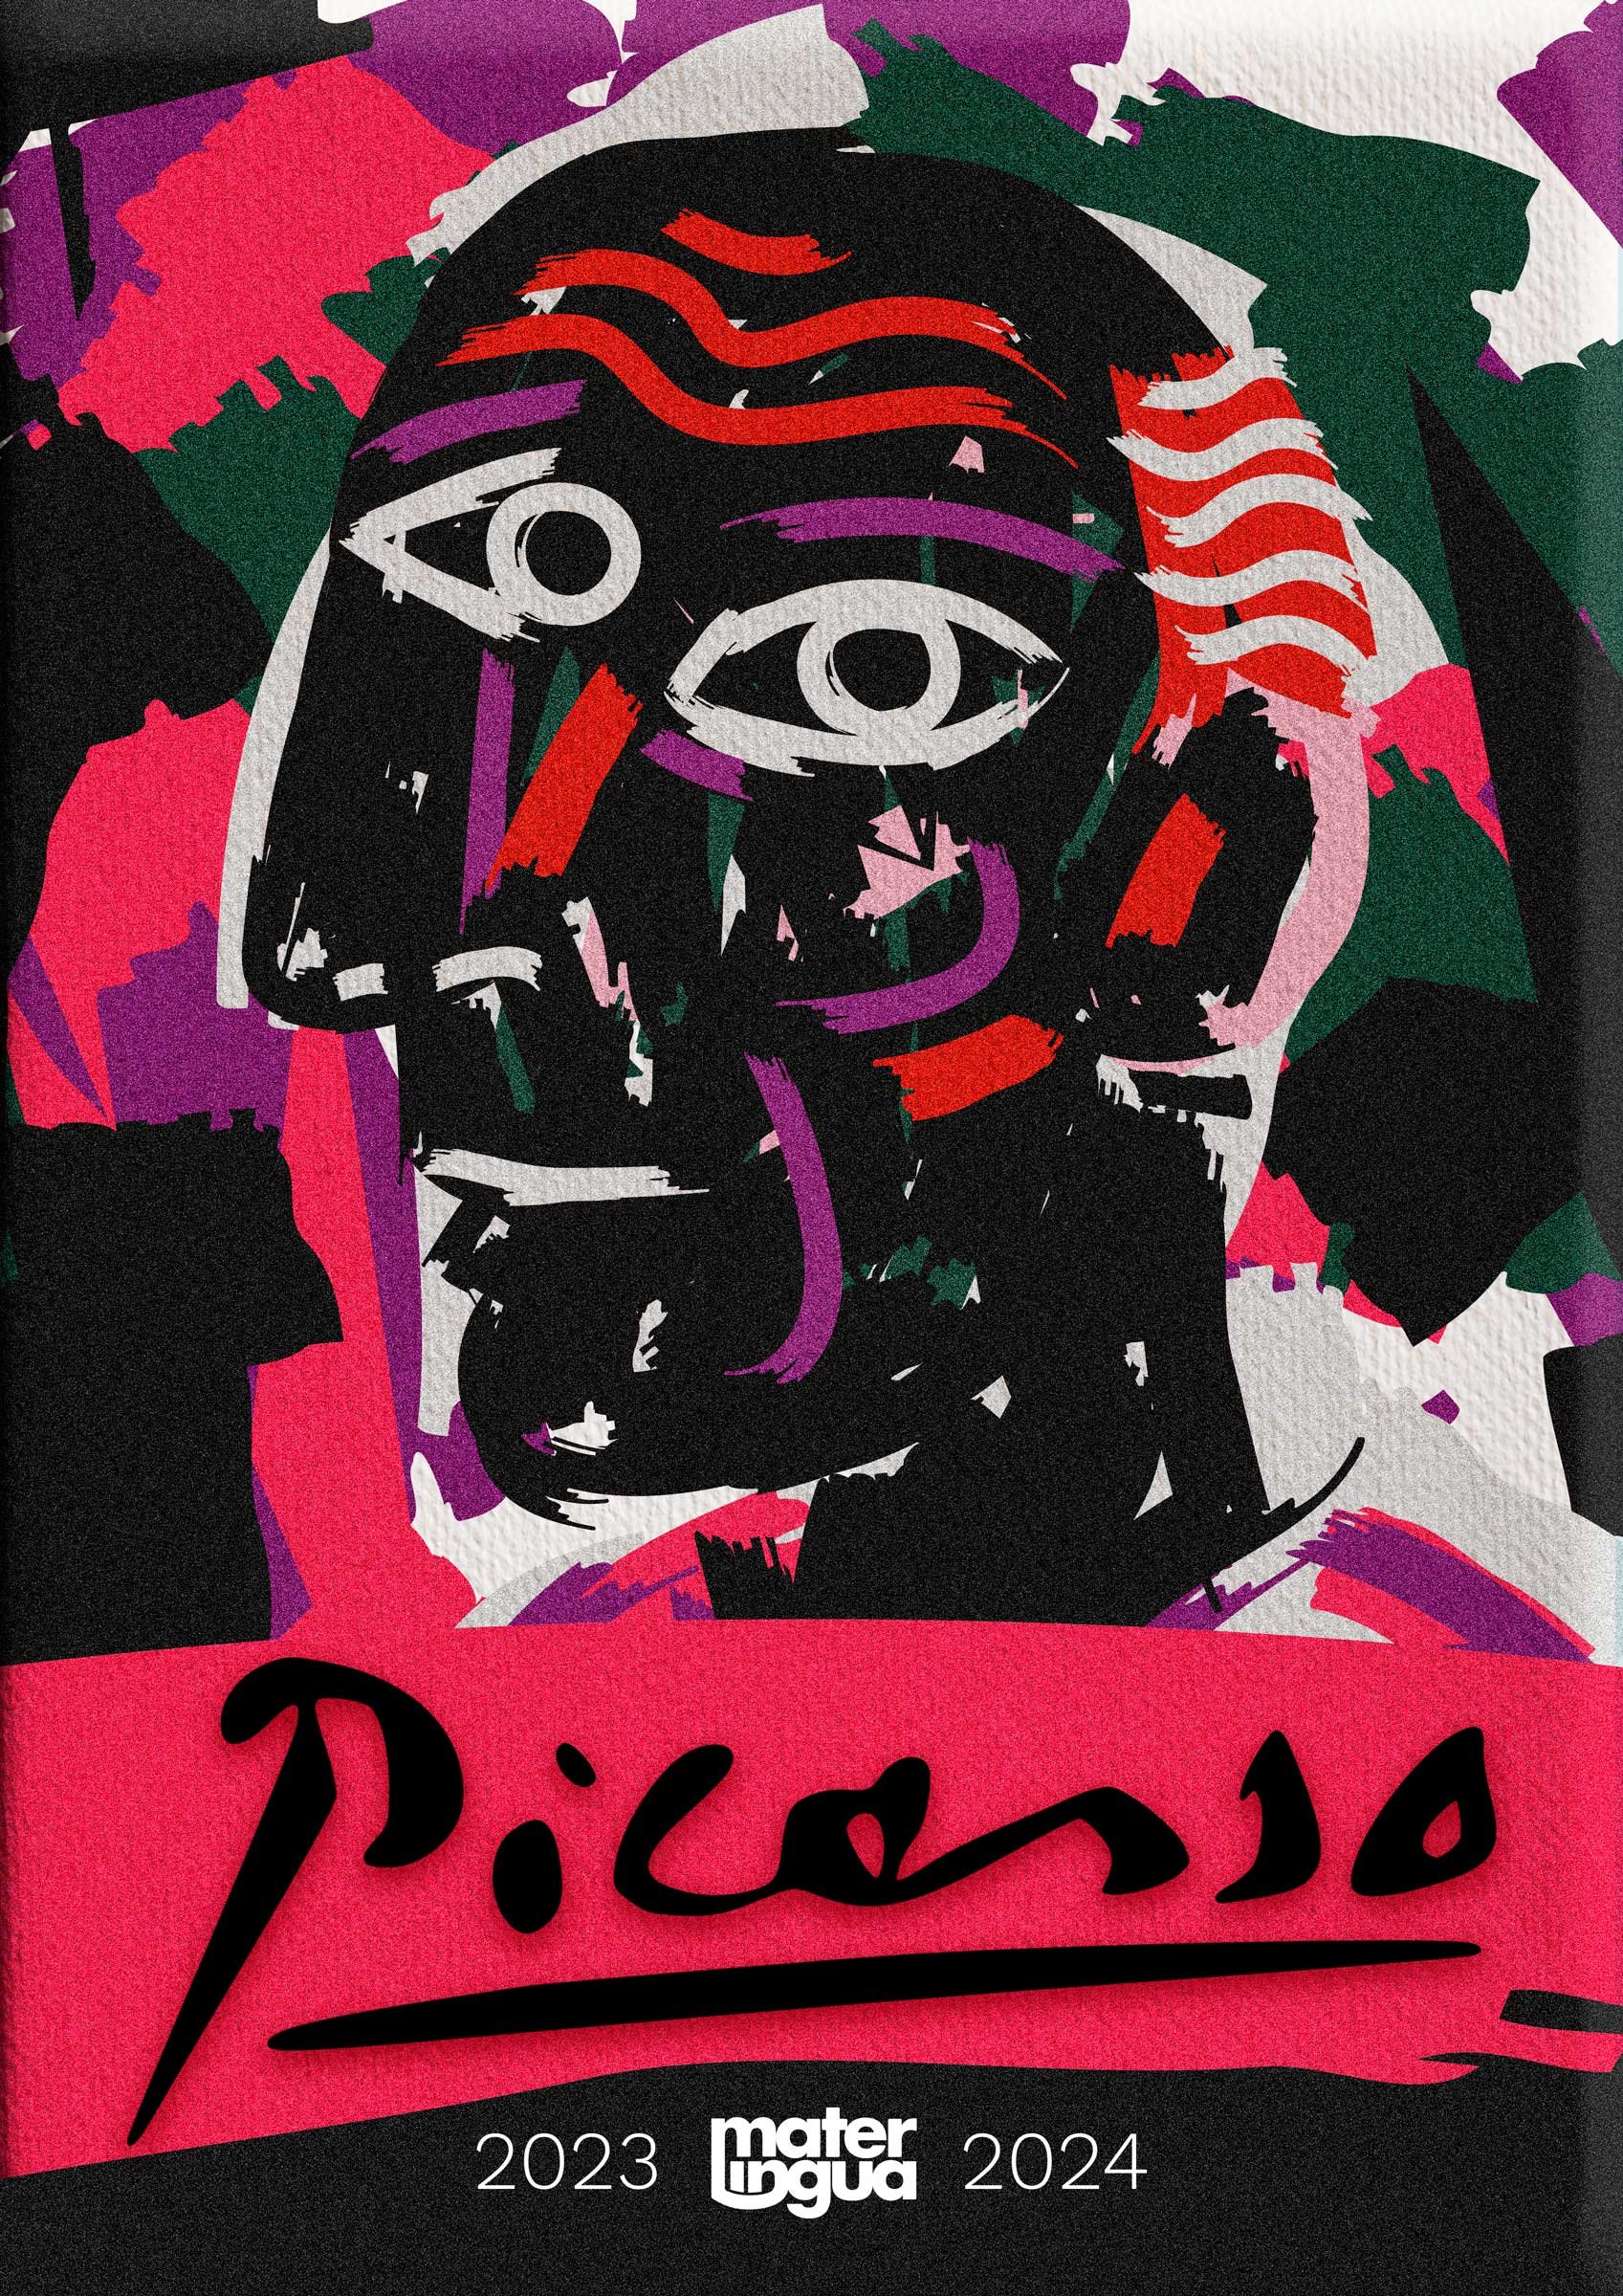 Picasso-Cubo-vertical